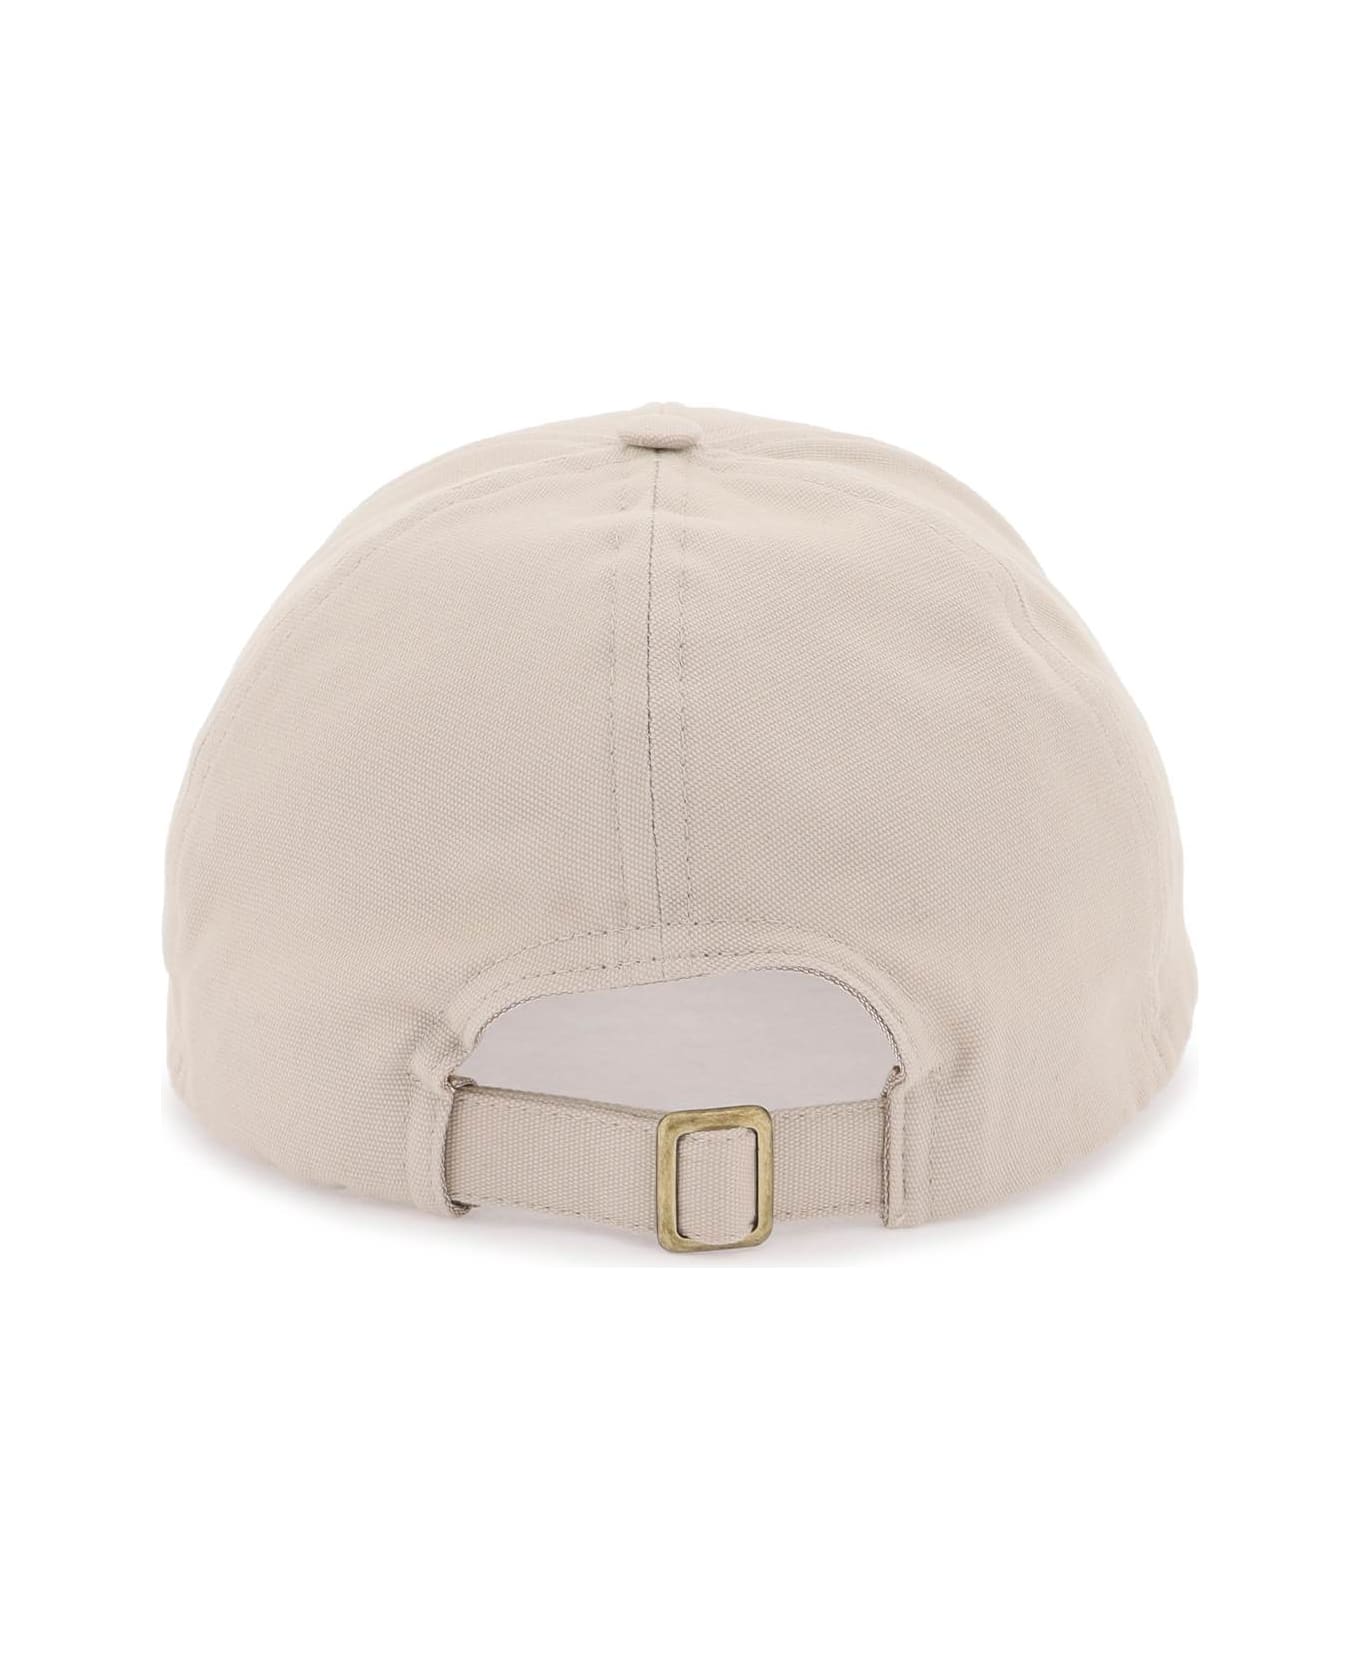 Vivienne Westwood Uni Colour Baseball Cap With Orb Embroidery - SAND (Beige)